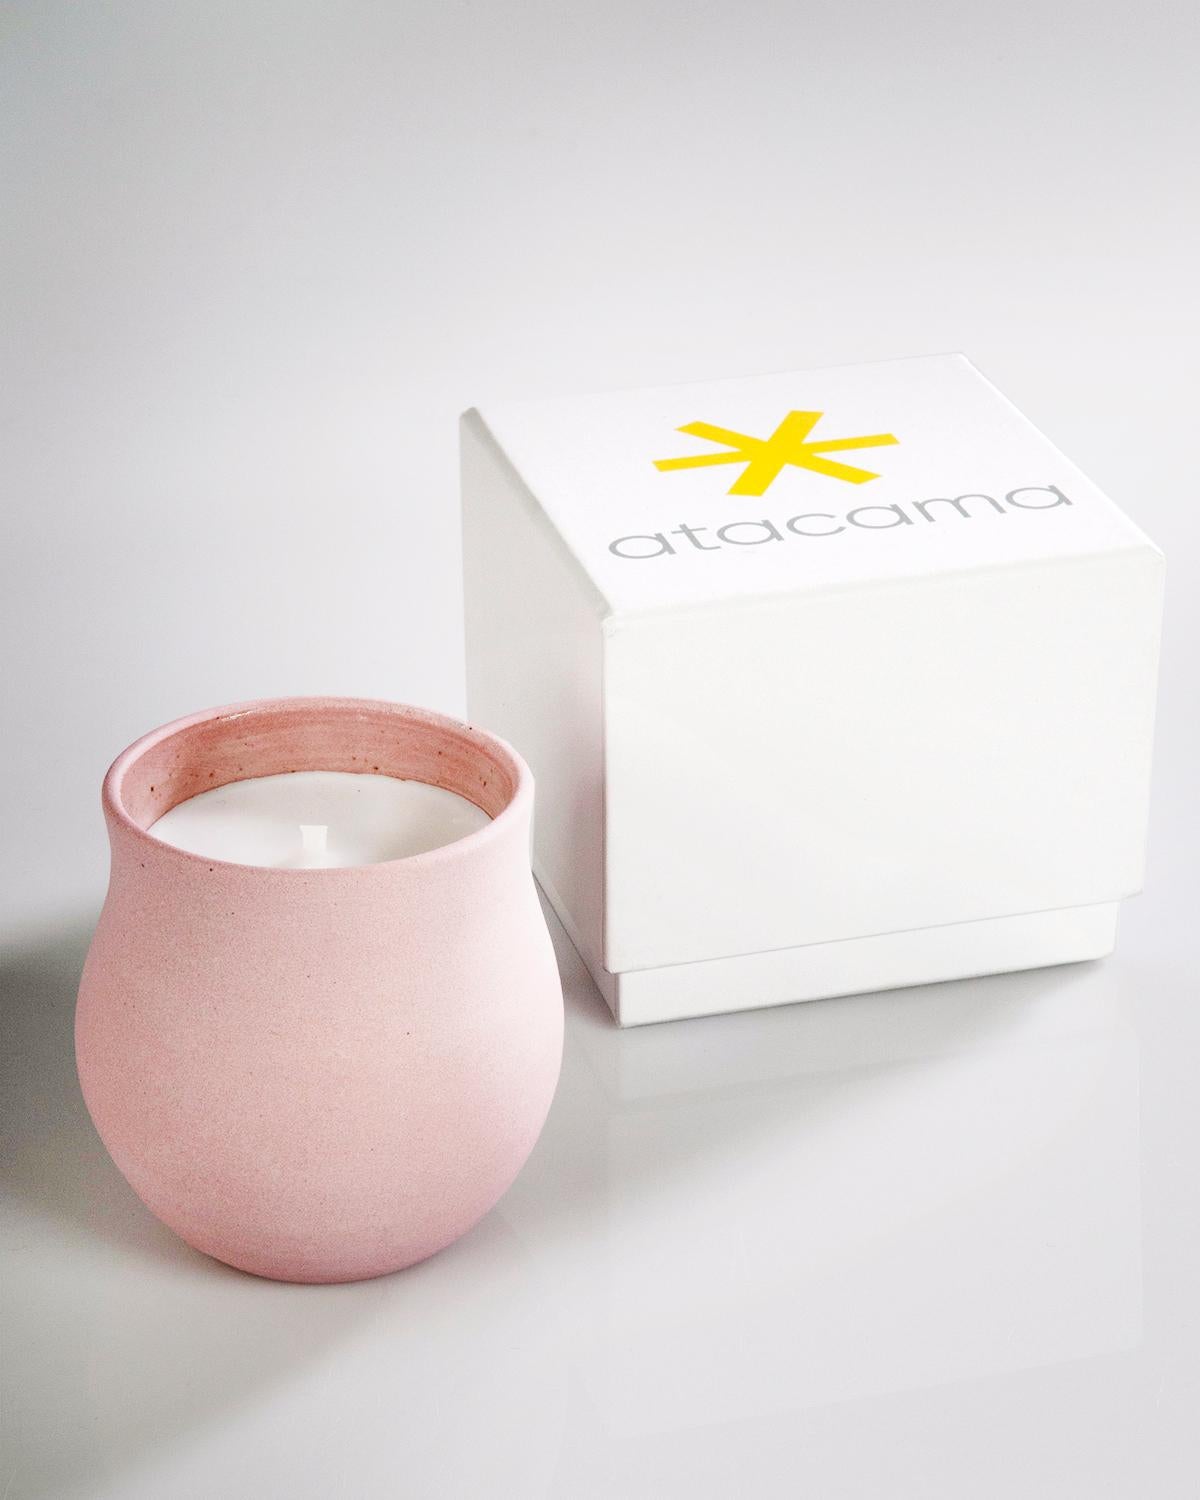 A floral candle to light up your home
A bright scented candle to elevate your space. These costal handmade scented candles are perfect on your nightstand by your bed or on your coffee table in the living room. Their organic modern handmade clay